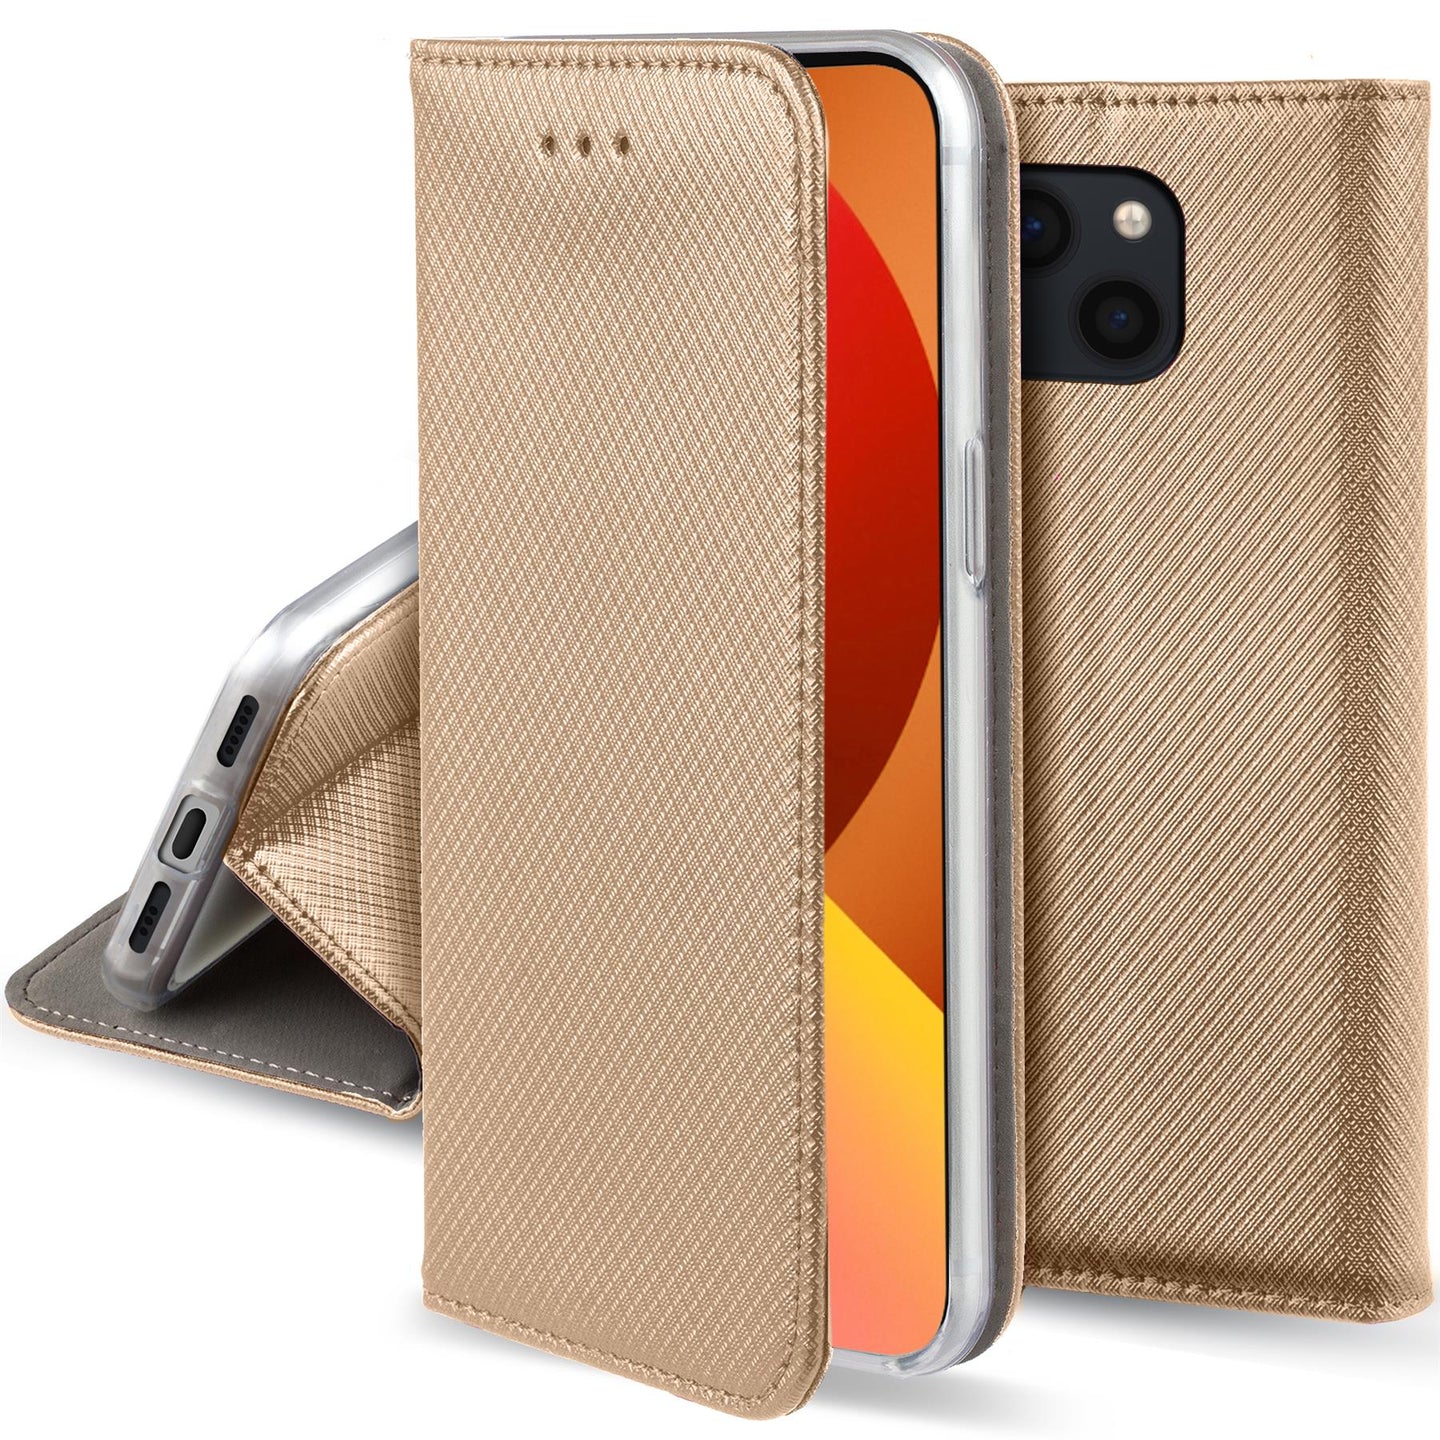 Moozy Case Flip Cover for iPhone 13, Gold - Smart Magnetic Flip Case Flip Folio Wallet Case with Card Holder and Stand, Credit Card Slots10,99